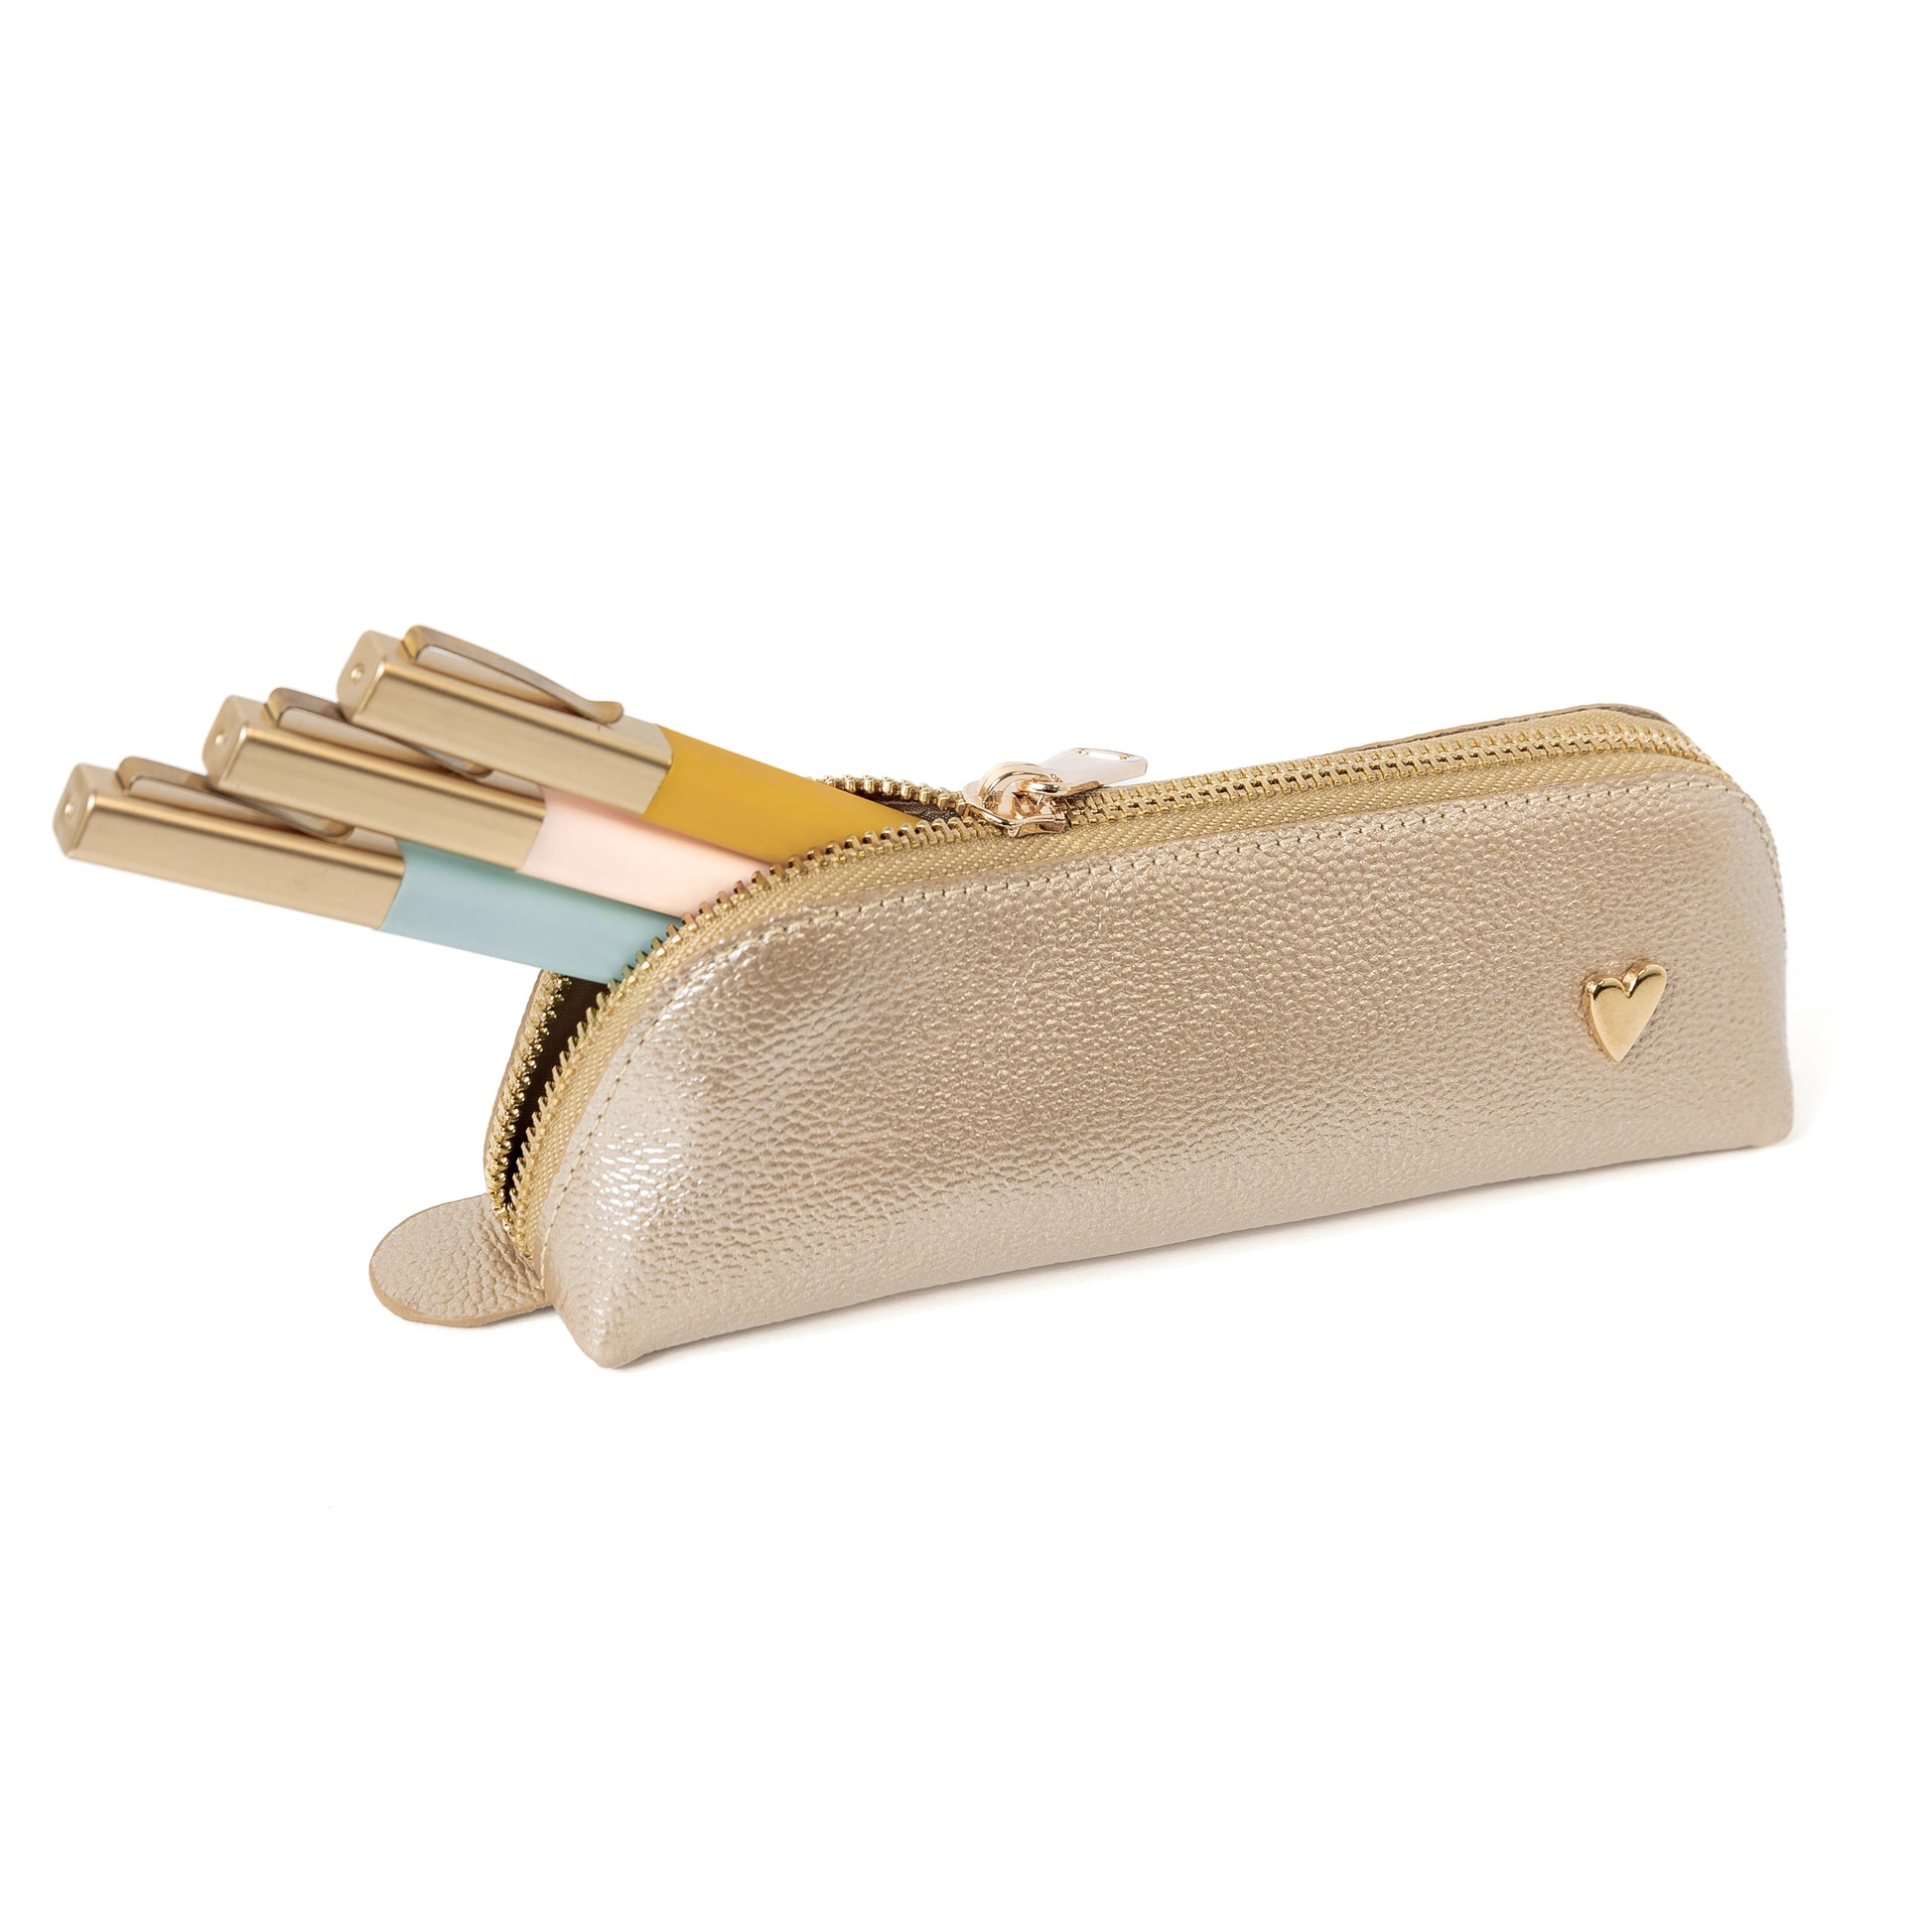 Pencil Case - Gold by Nataly Mendez, El portalapices no incluye los marcadores mostrados en la imagen. Genuine Leather Signature Heart Fits about 15 pencils or pens Designed to stand in their own 2" H, 6.5" W, 2" D